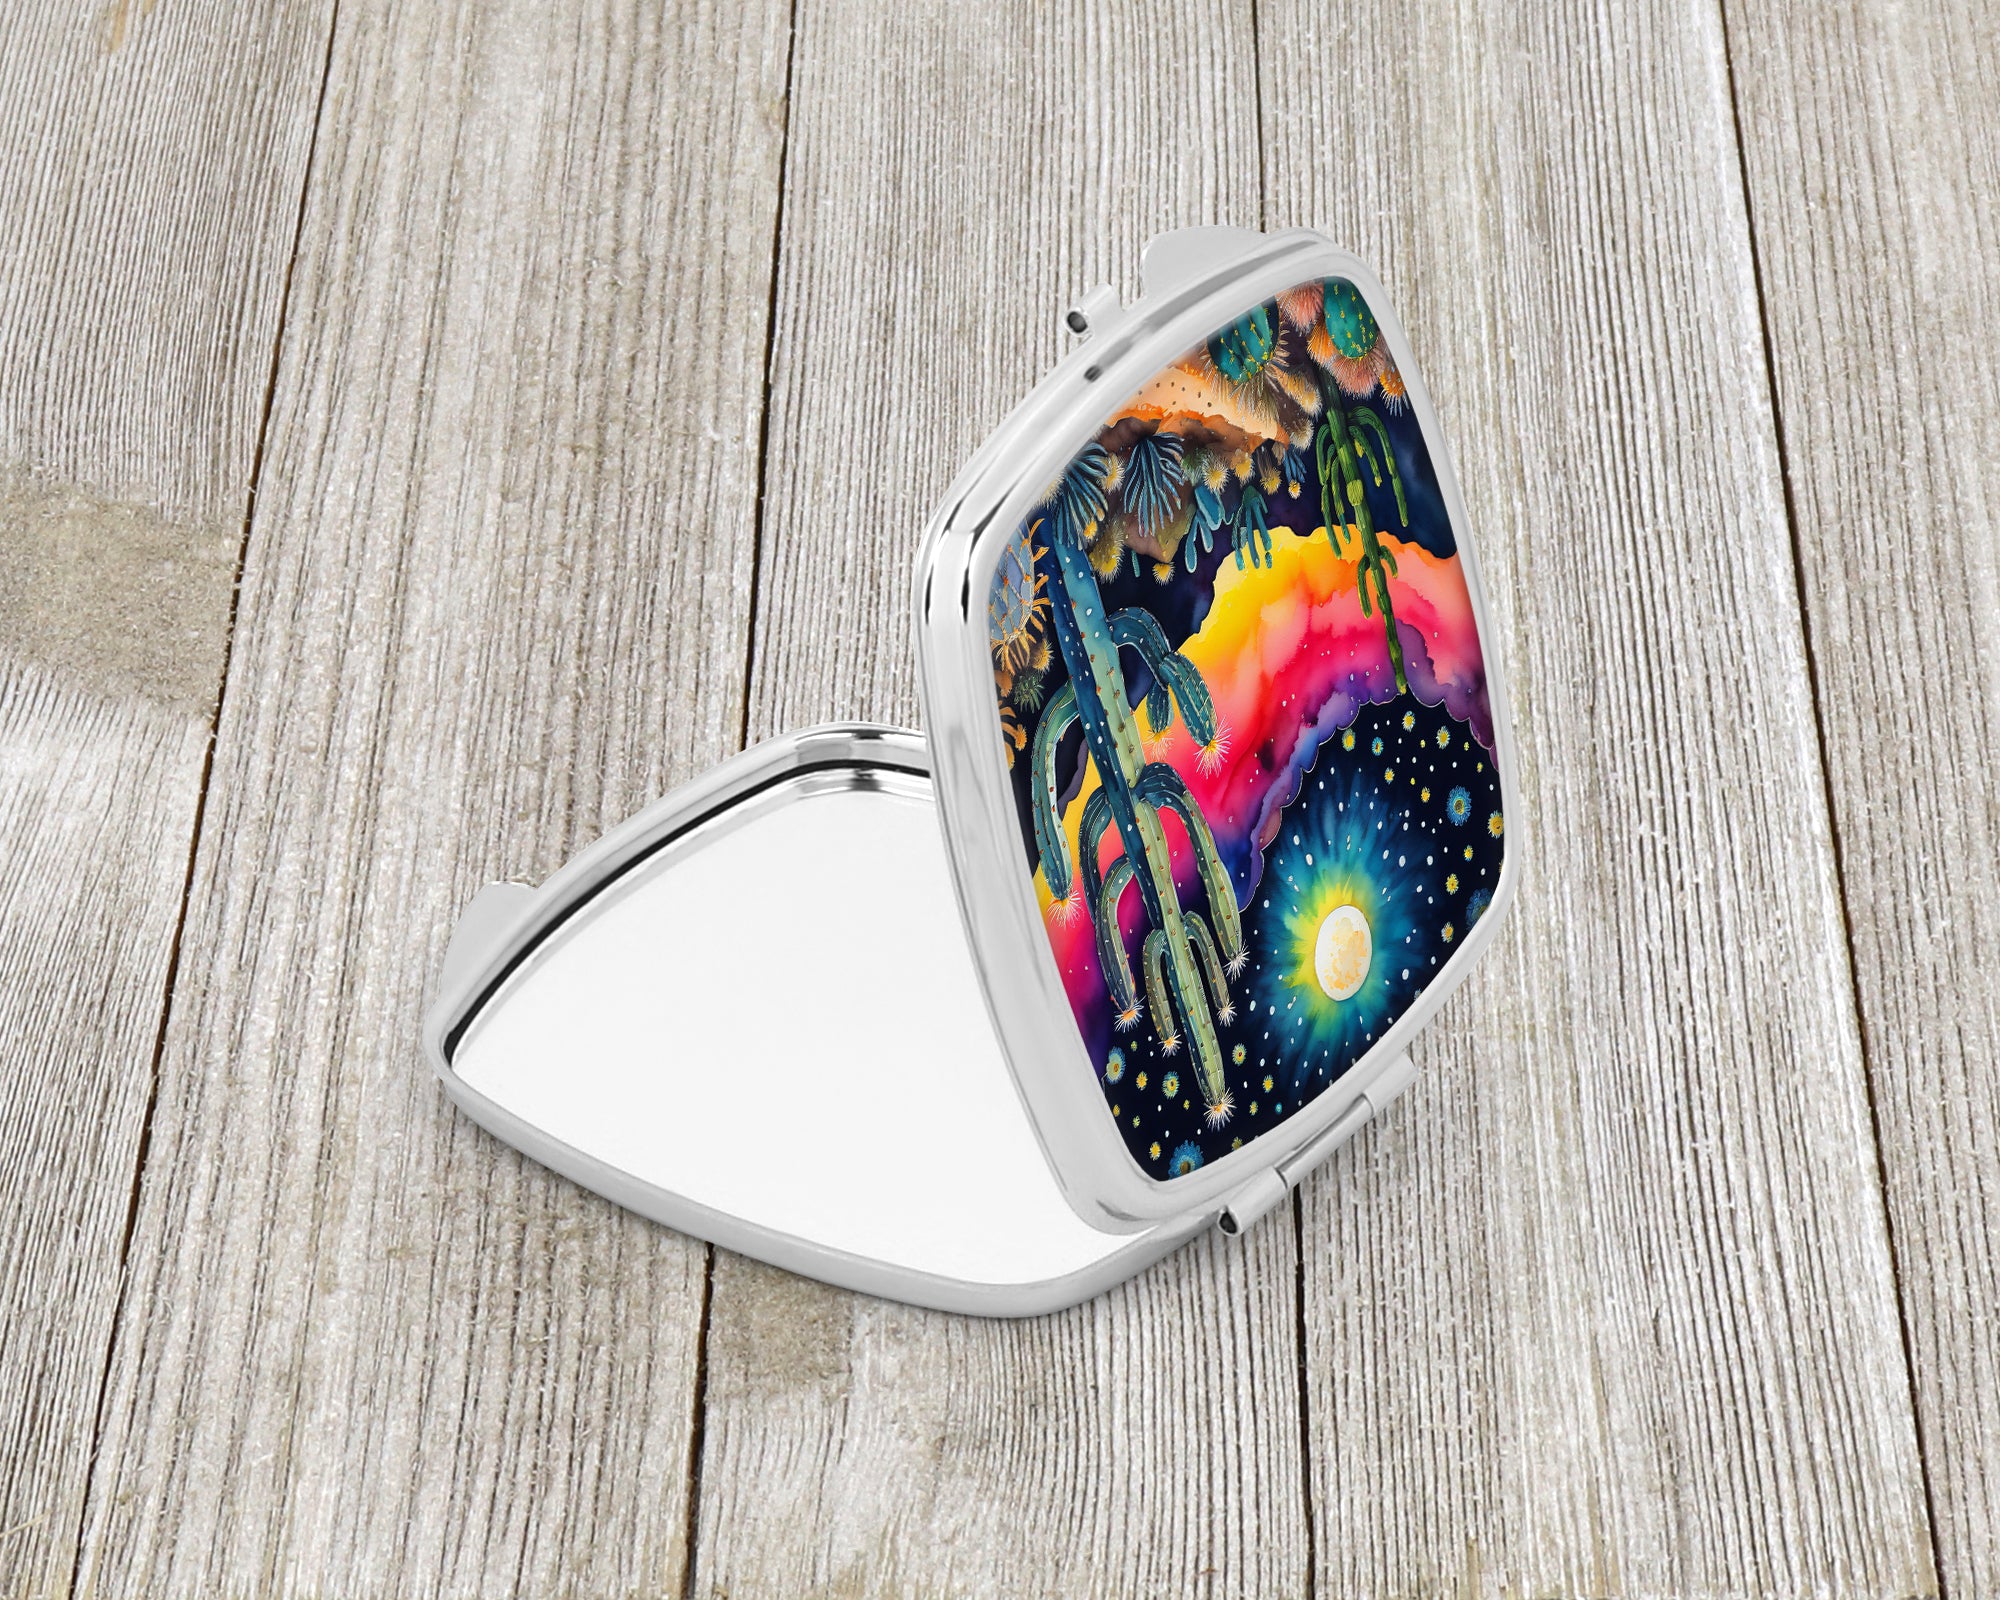 Buy this Colorful Queen of the Night Cactus Compact Mirror